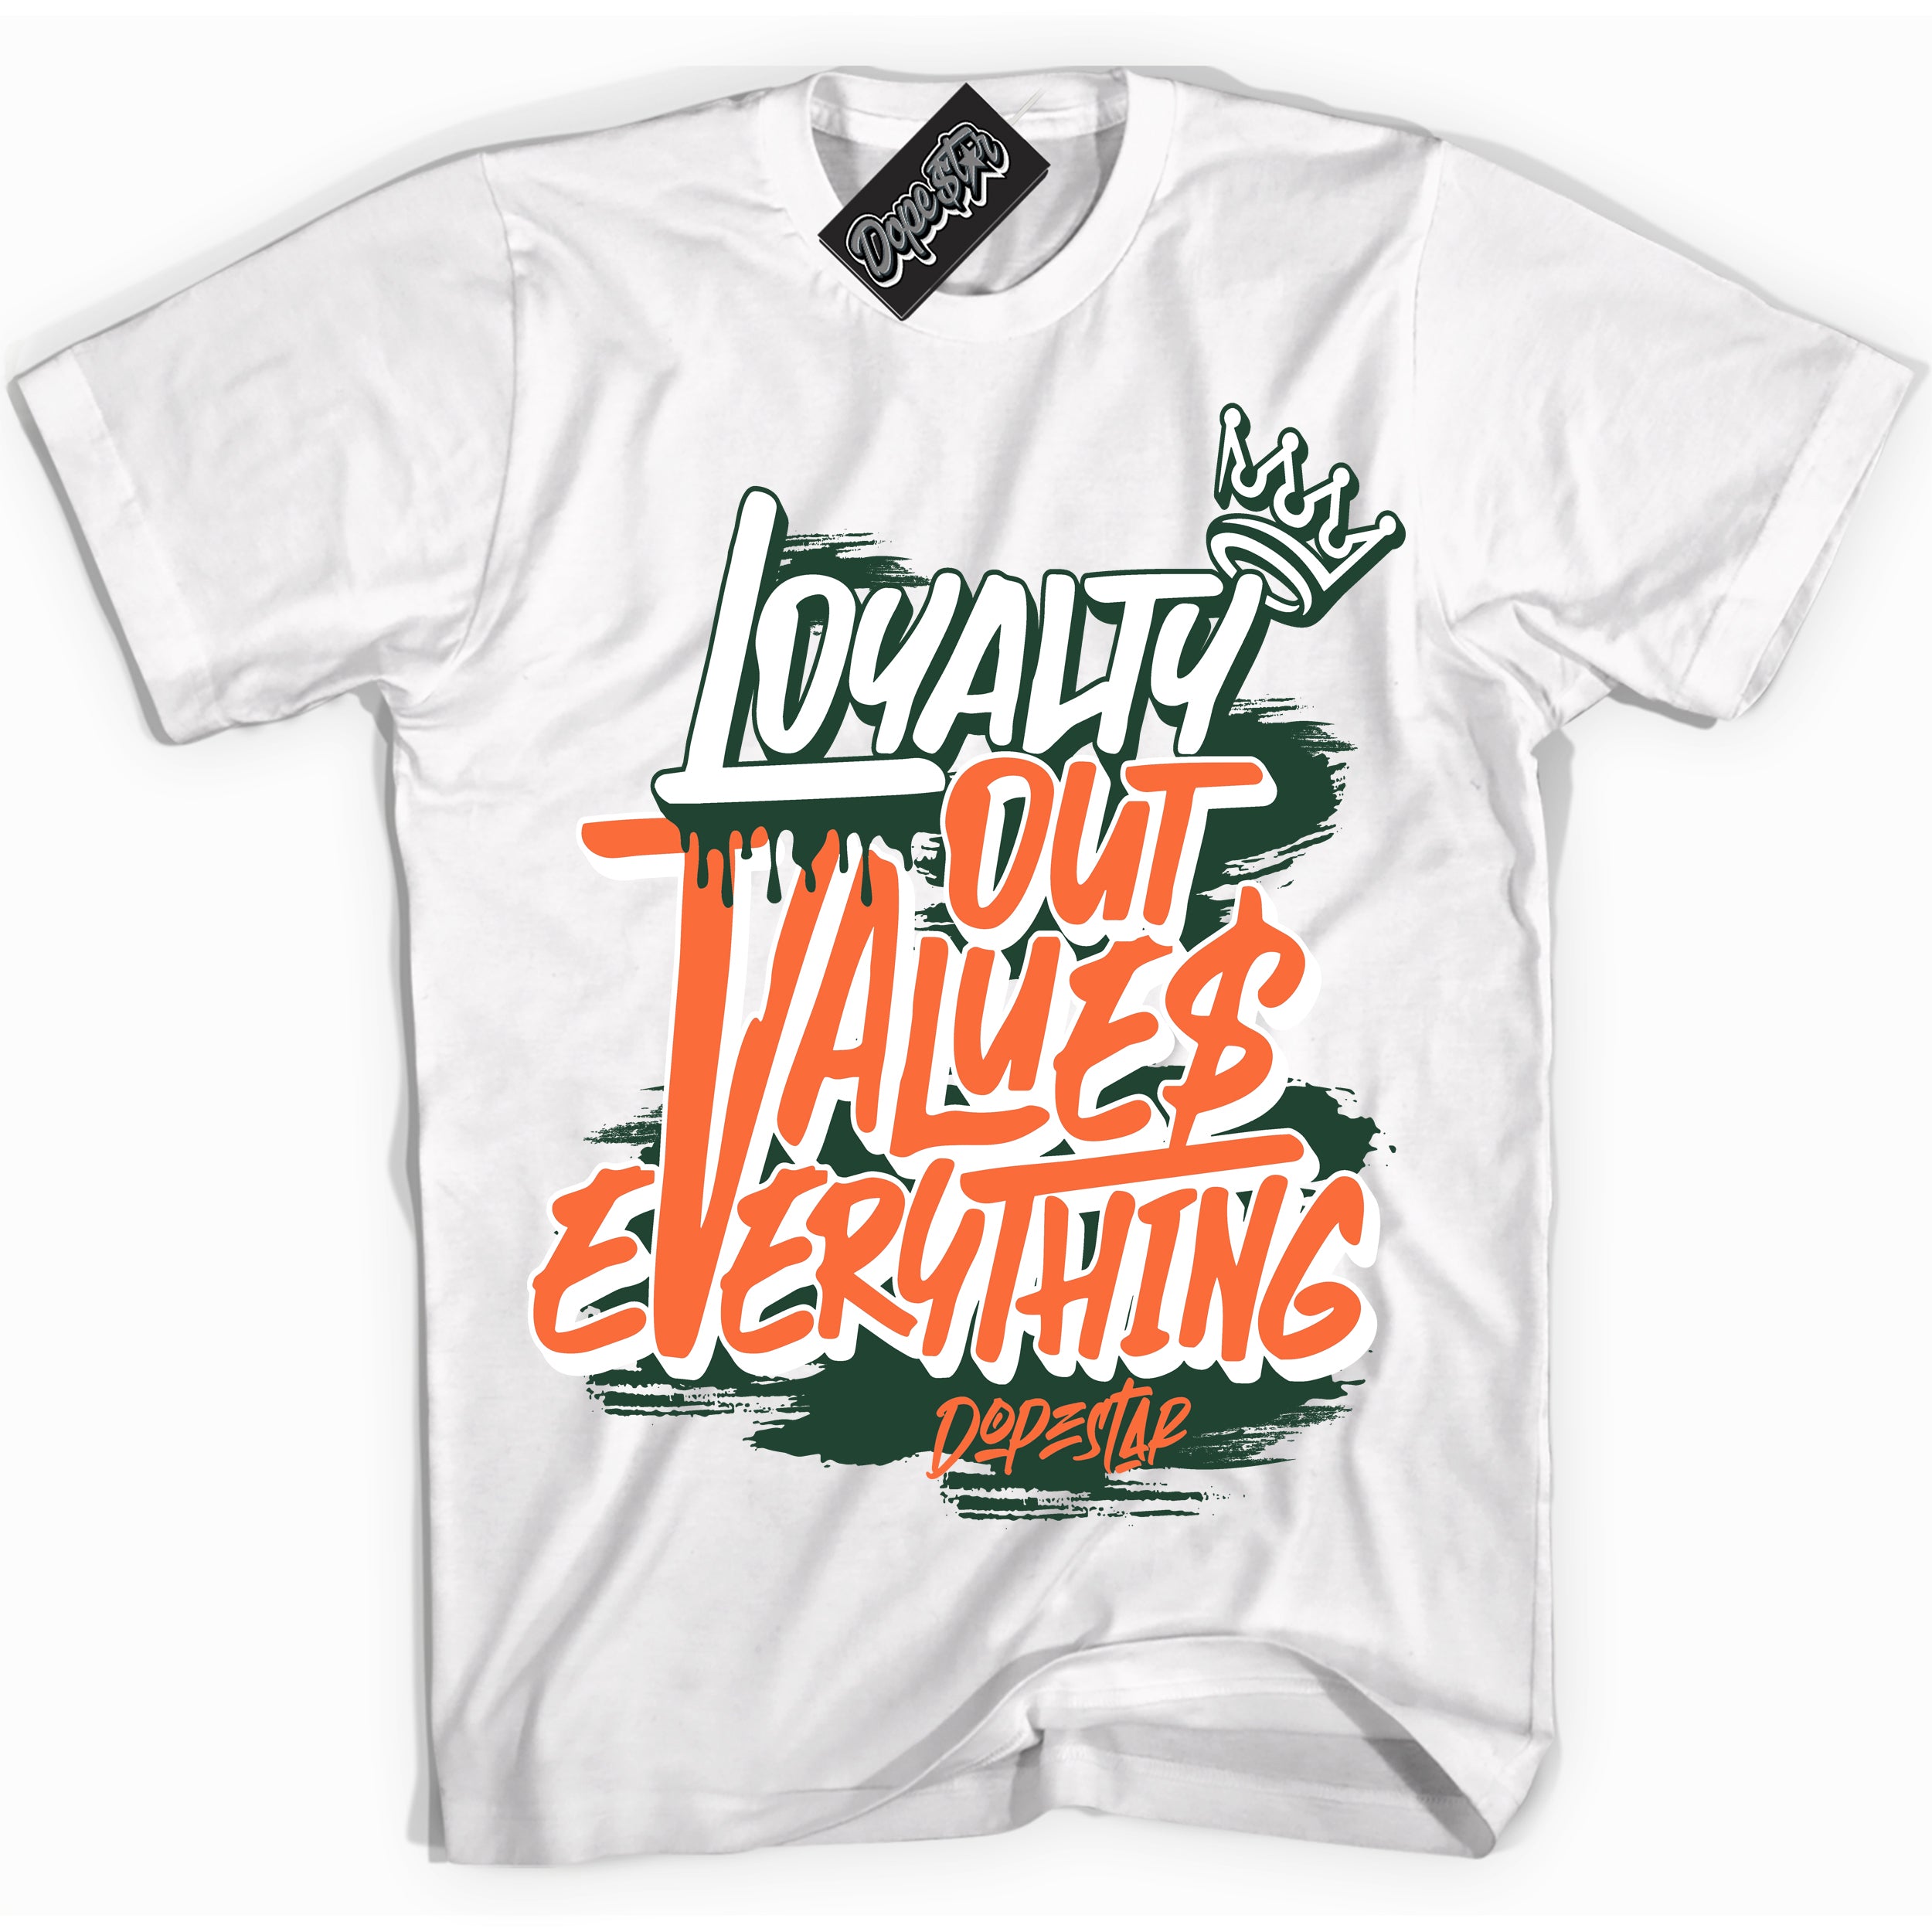 Cool White Shirt with “ Loyalty Out Values Everything” design that perfectly matches Miami Hurricanes Sneakers.